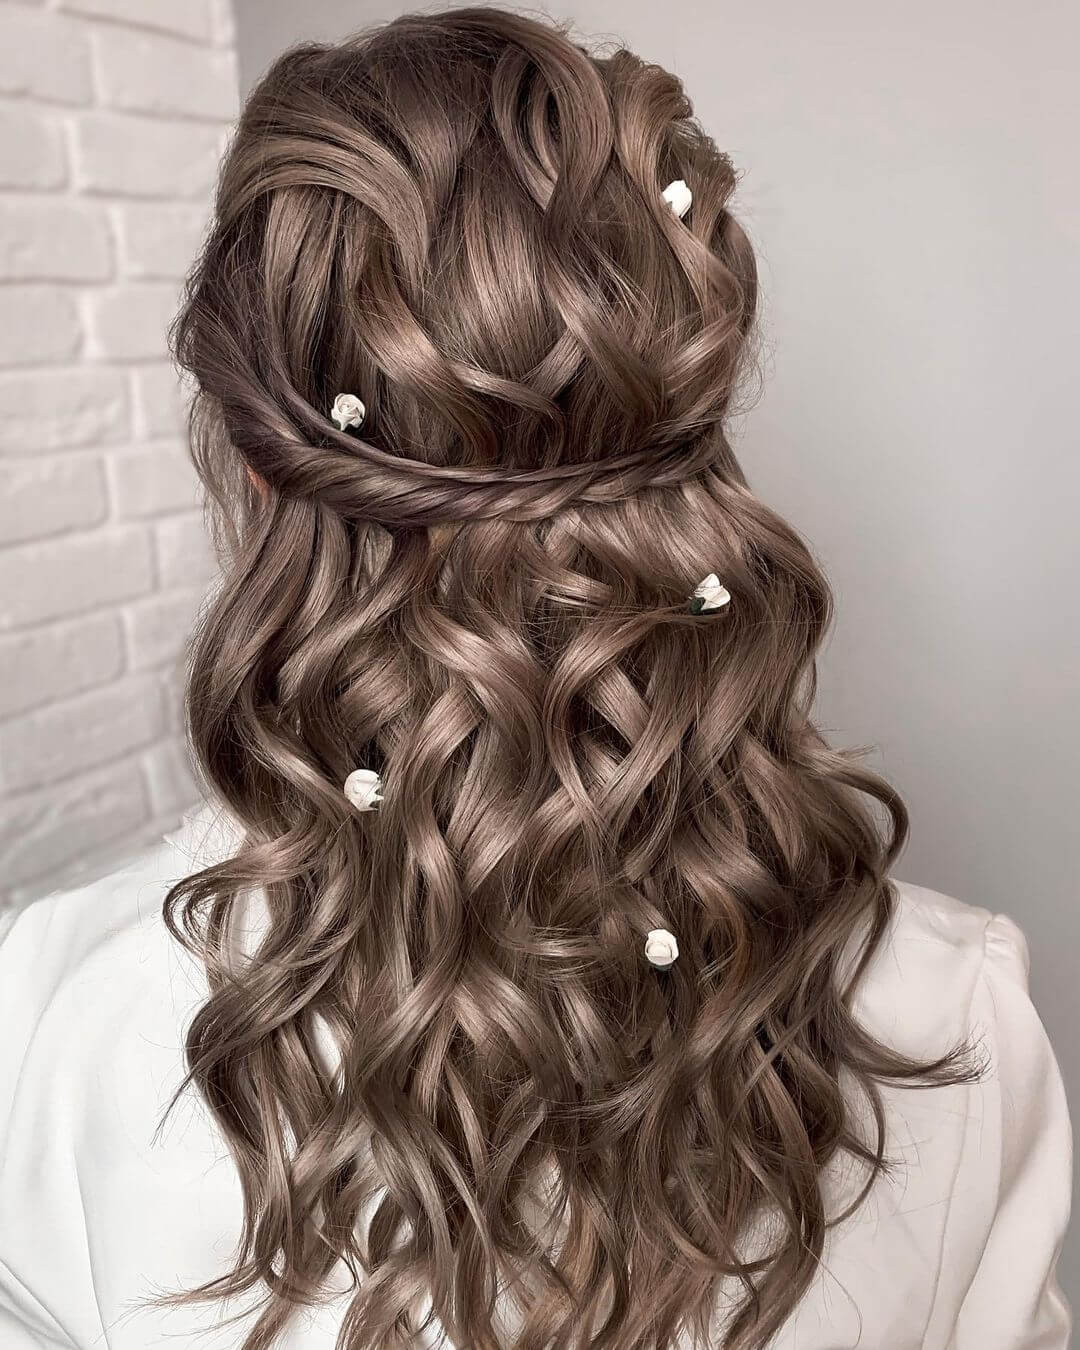 Bridesmaid Hairstyle for Young Women Beachy waves